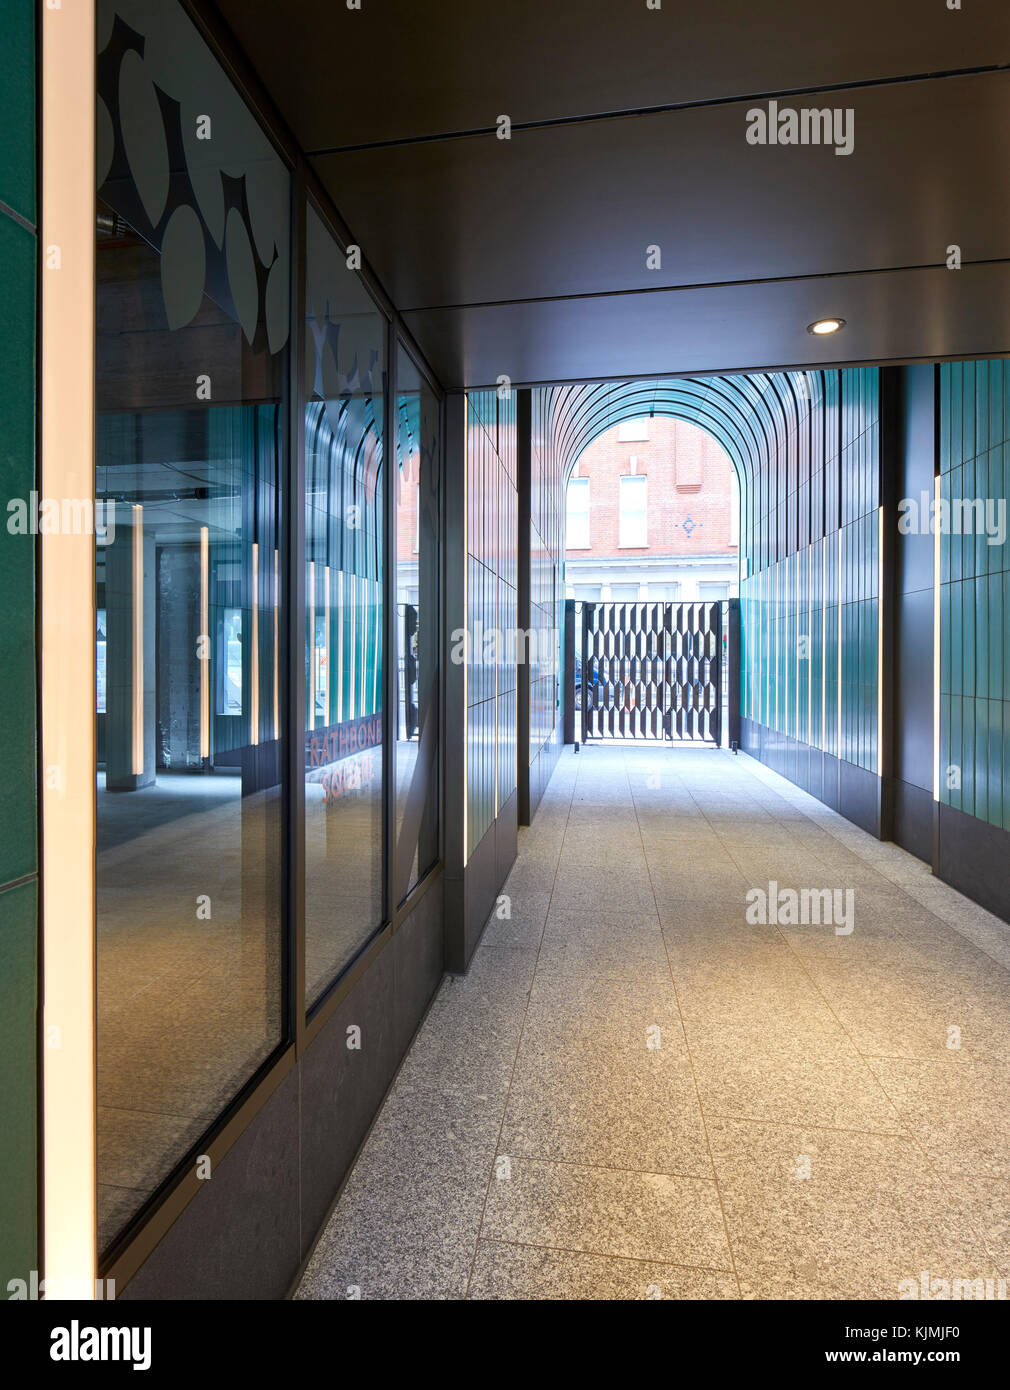 View from within pedestrian entrance tunnel. Rathbone Square, London, United Kingdom. Architect: Make Ltd, 2017. Stock Photo